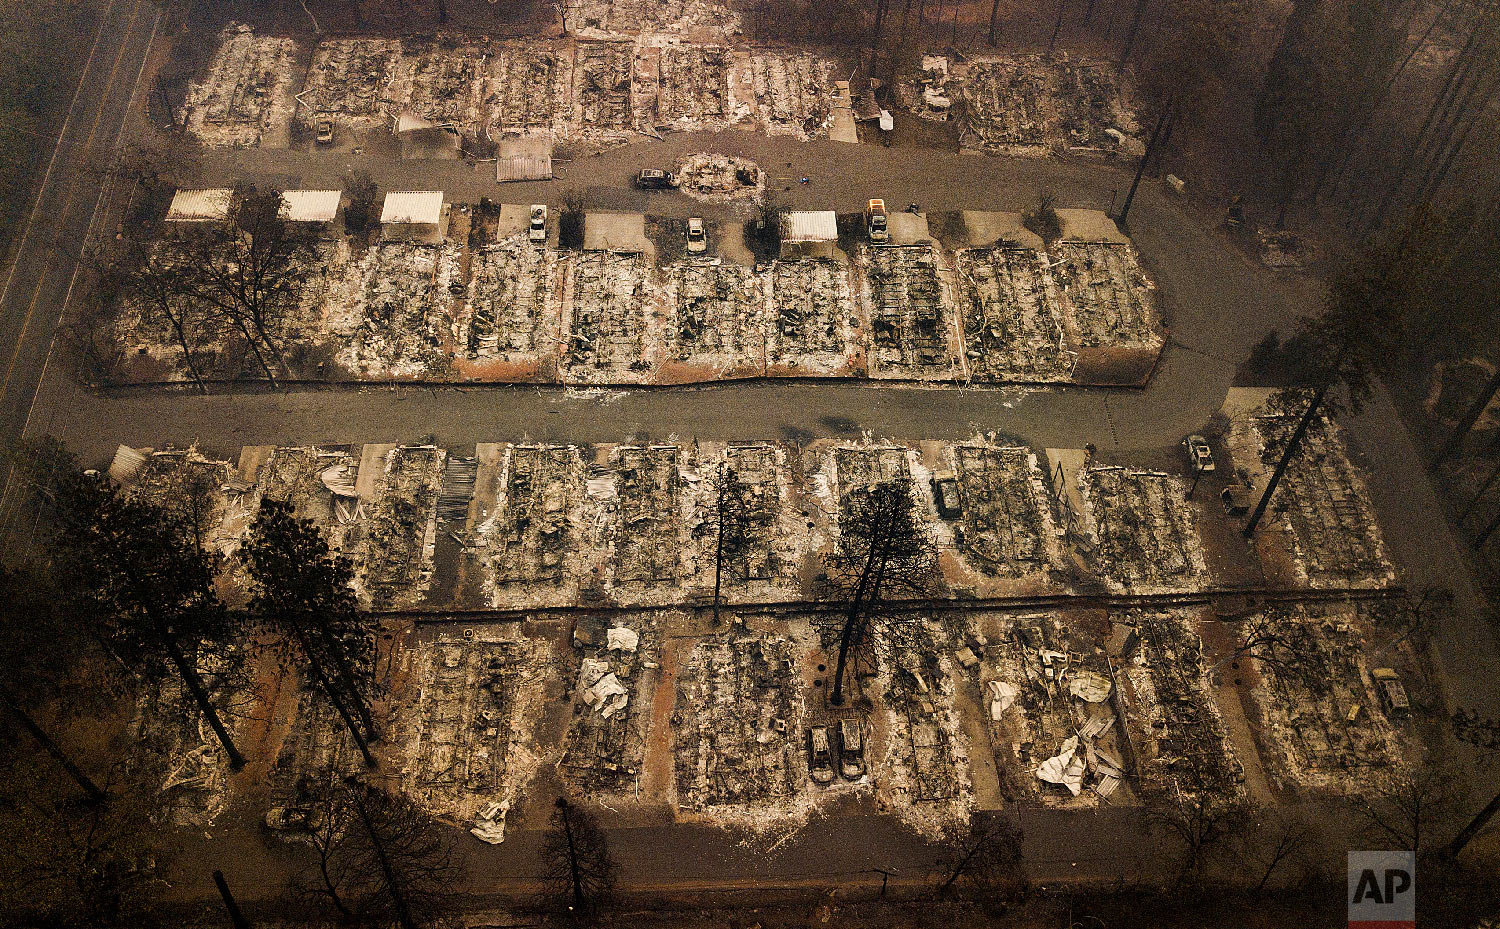  Ashes and debris are all that remain where houses once stood in Paradise, Calif., on Nov. 15, 2018, after a wildfire destroyed the town. (AP Photo/Noah Berger) 